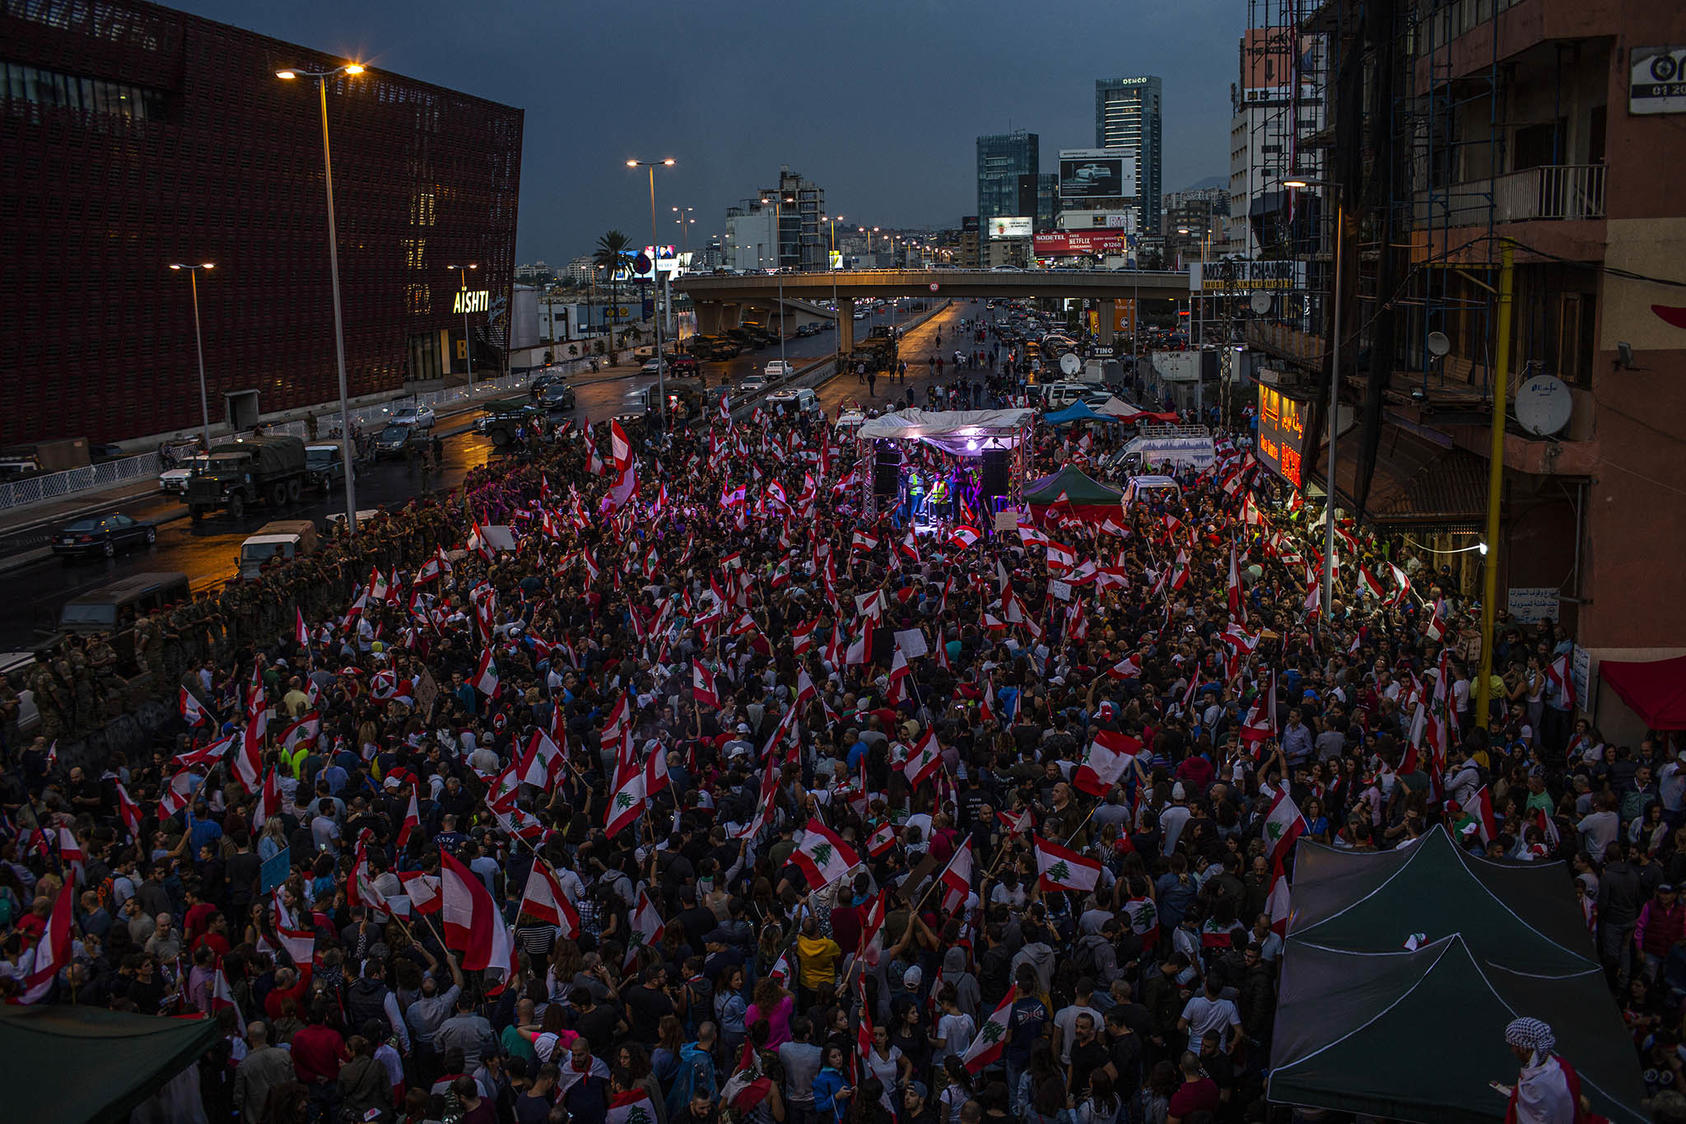 Thousands of people protesting corruption and the government's inability to provide basic services in Beirut on Oct. 23, 2019. (Diego Ibarra Sanchez/The New York Times)